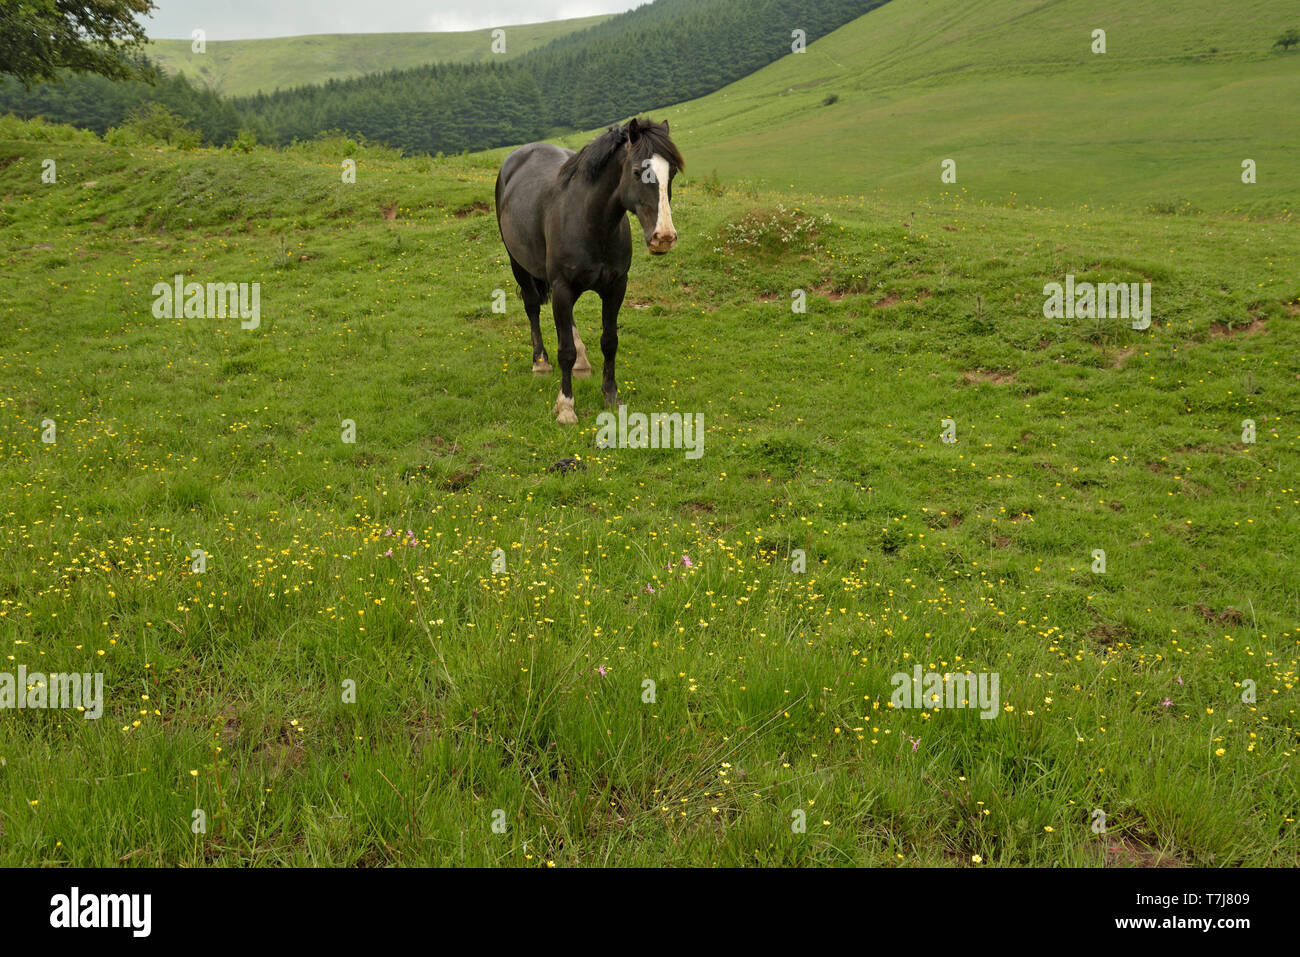 A horse in a Black Mountains Meadow with Meadow Flowers Stock Photo